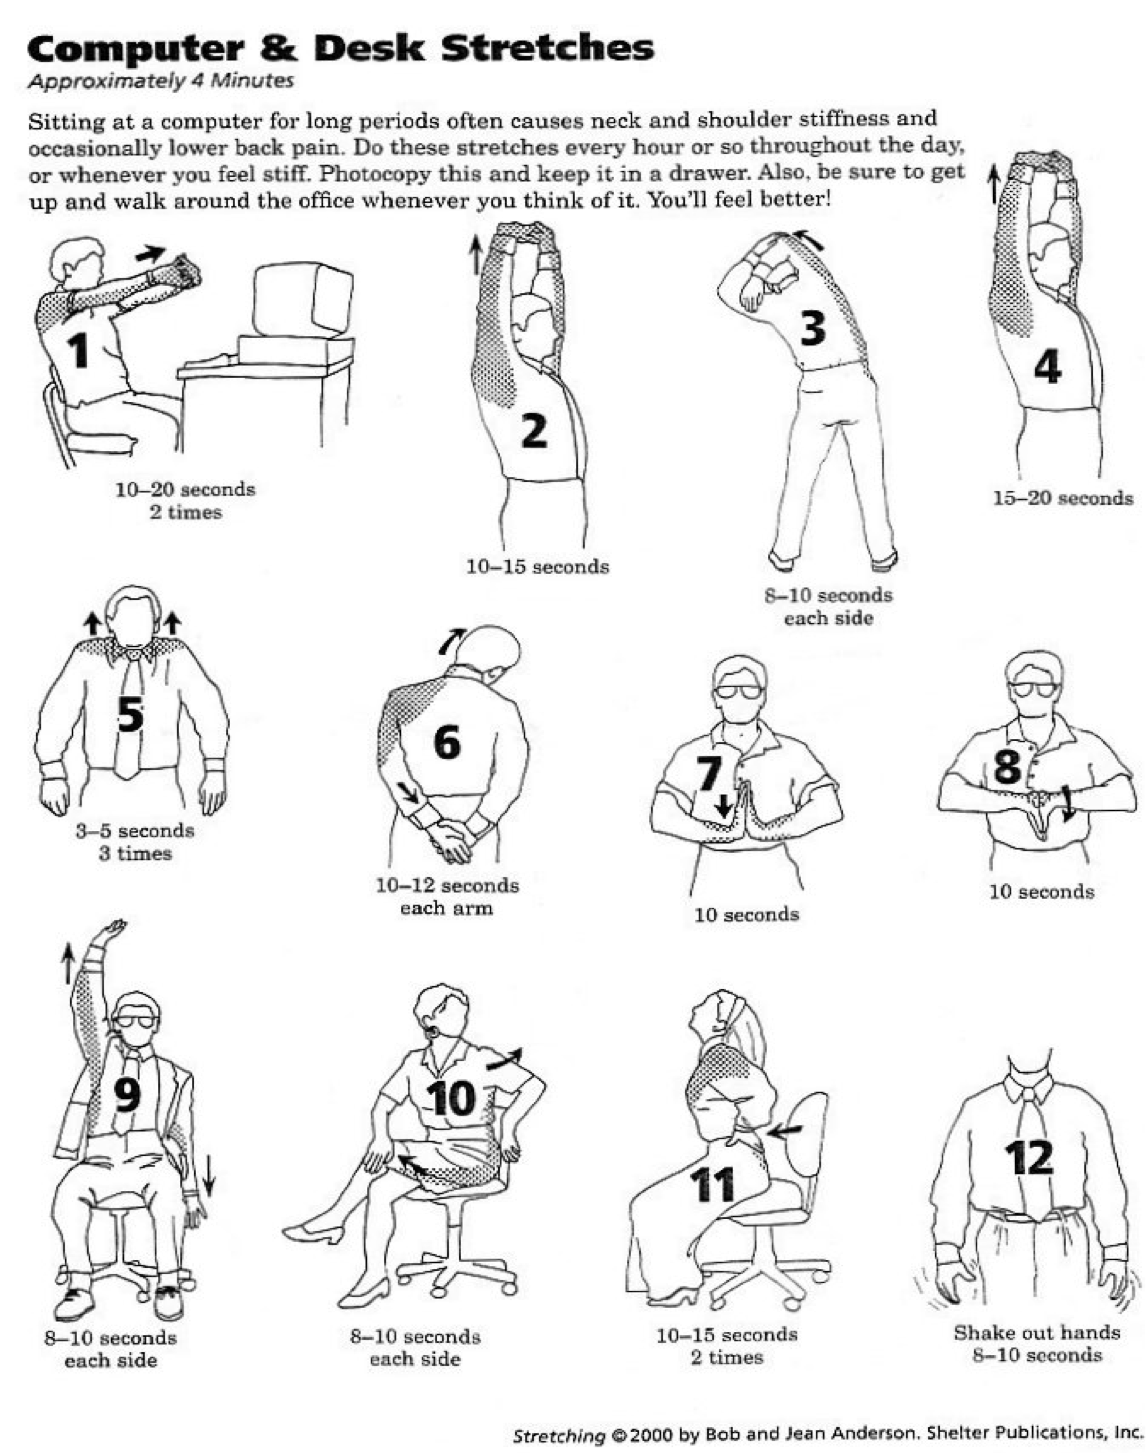 Graphic showing computer & desk stretches.